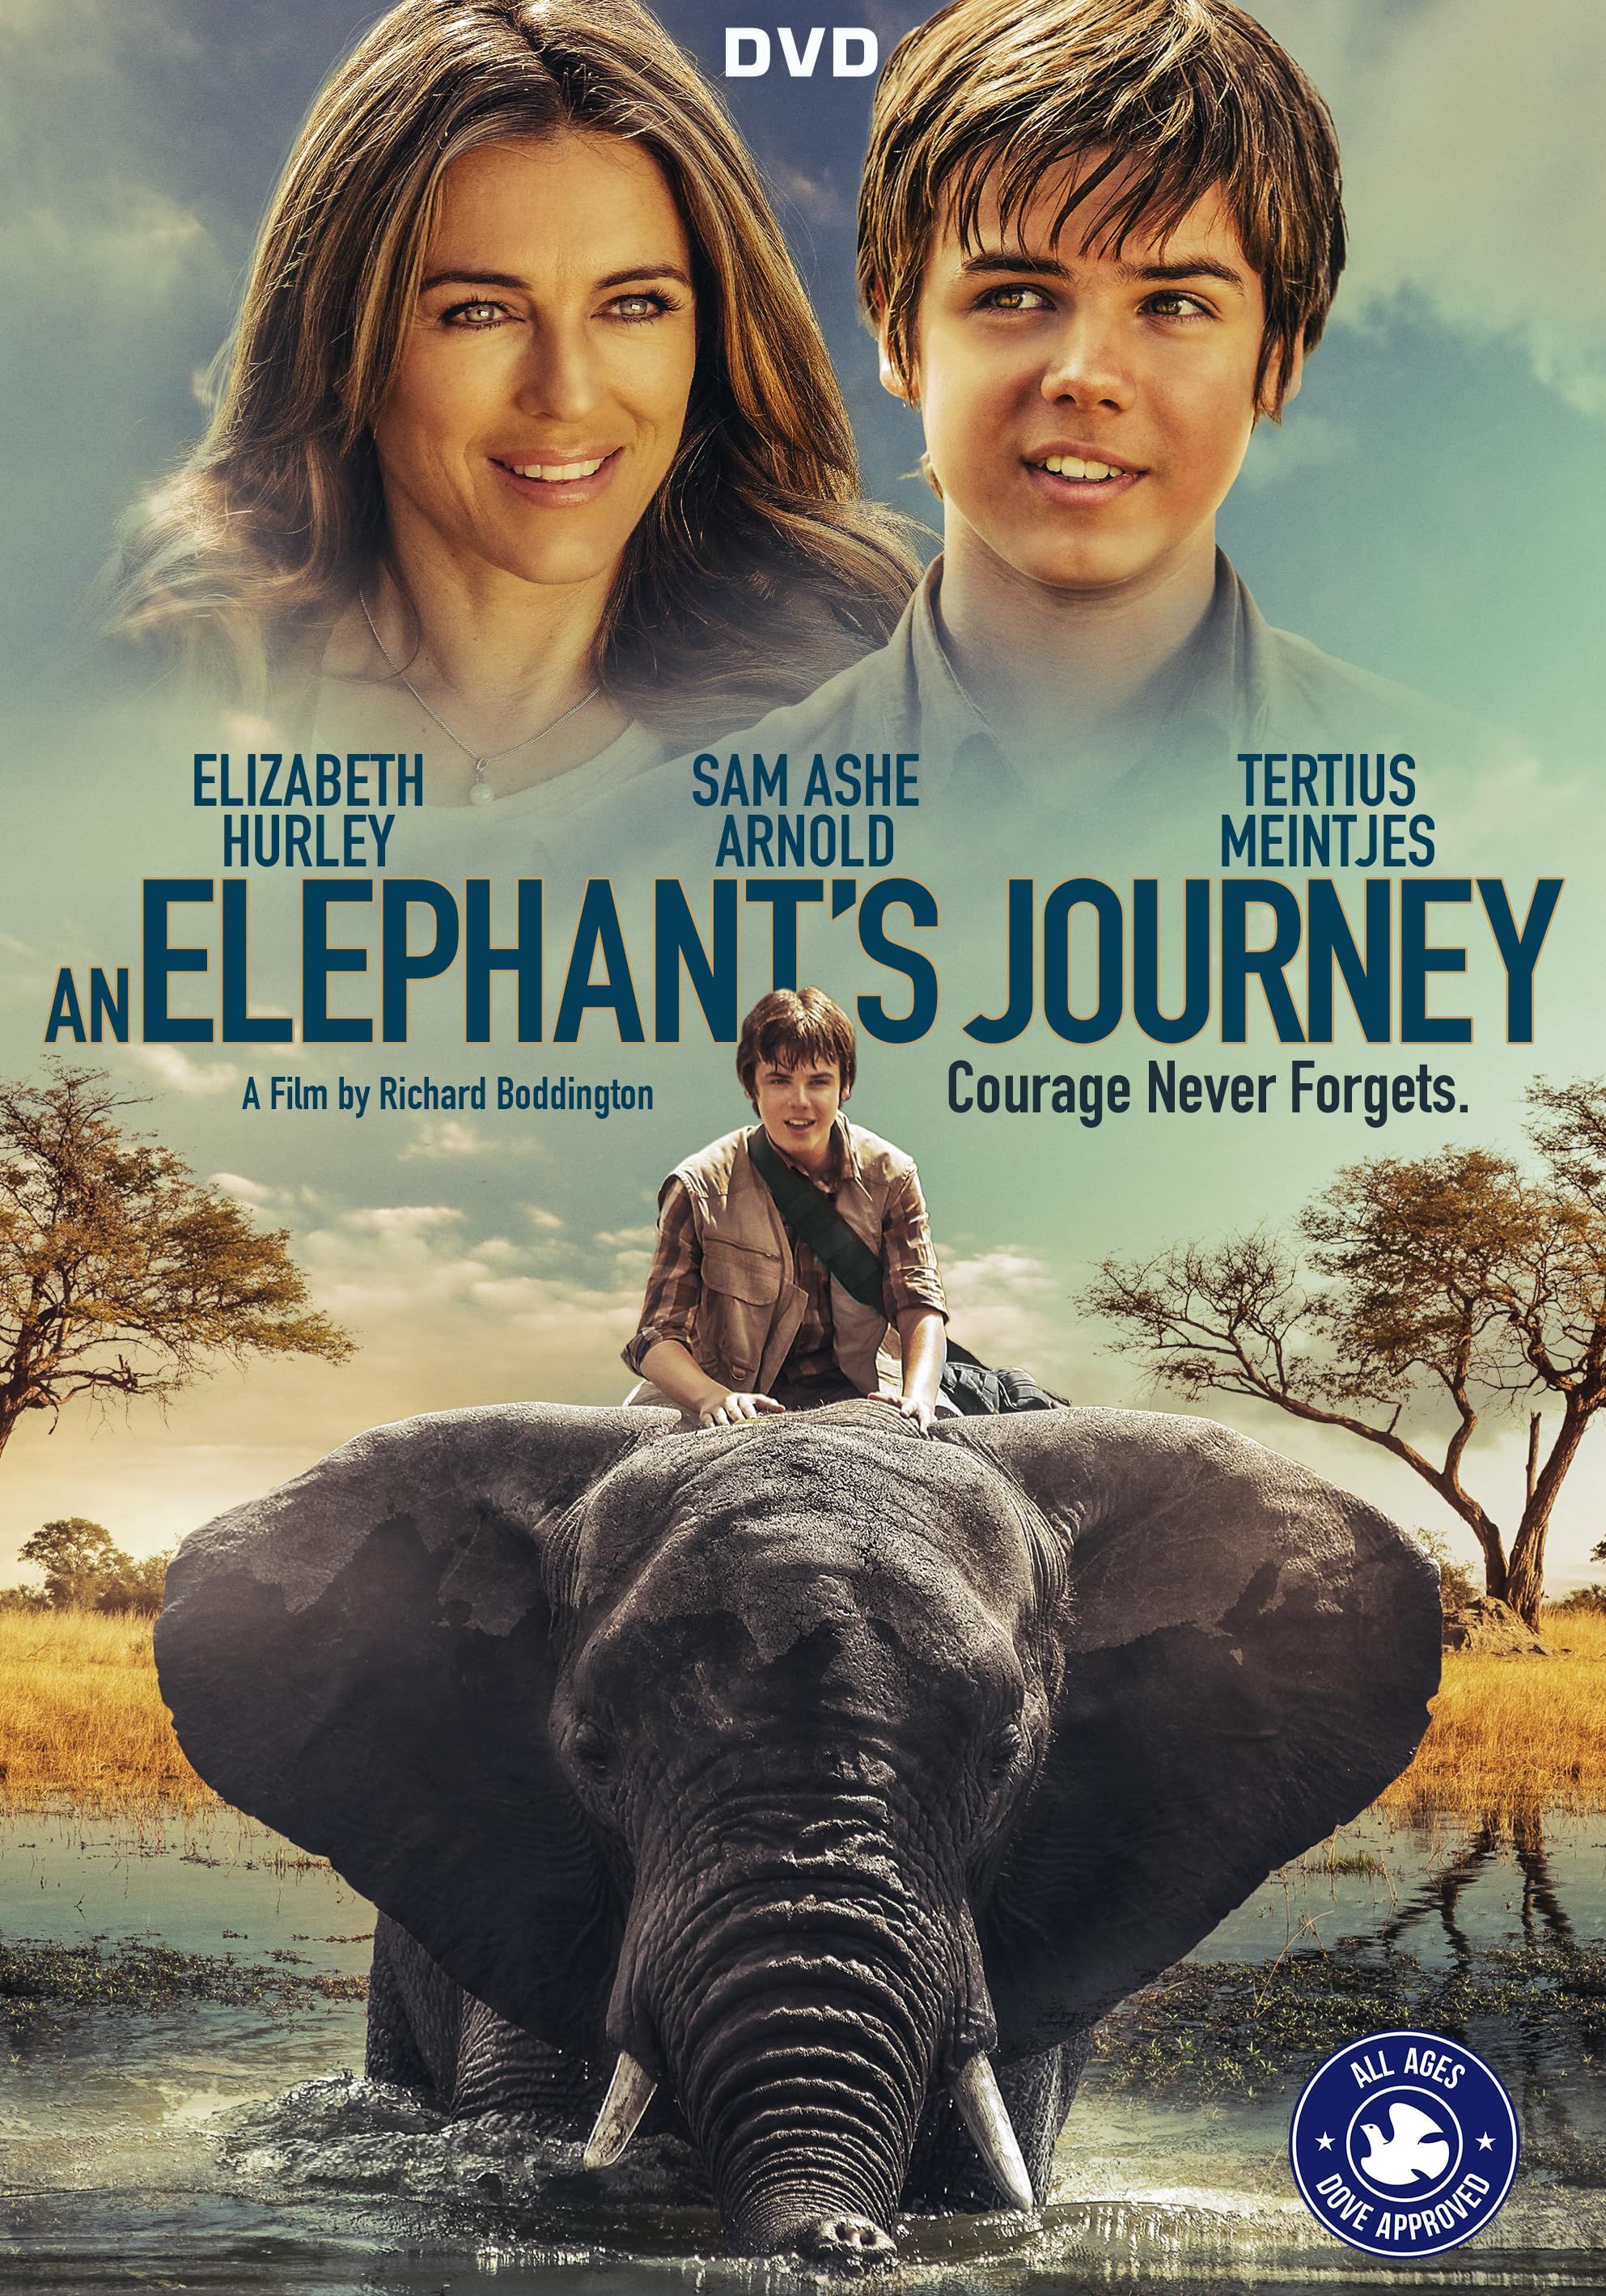 An Elephants Journey (2017) Hindi Dubbed download full movie